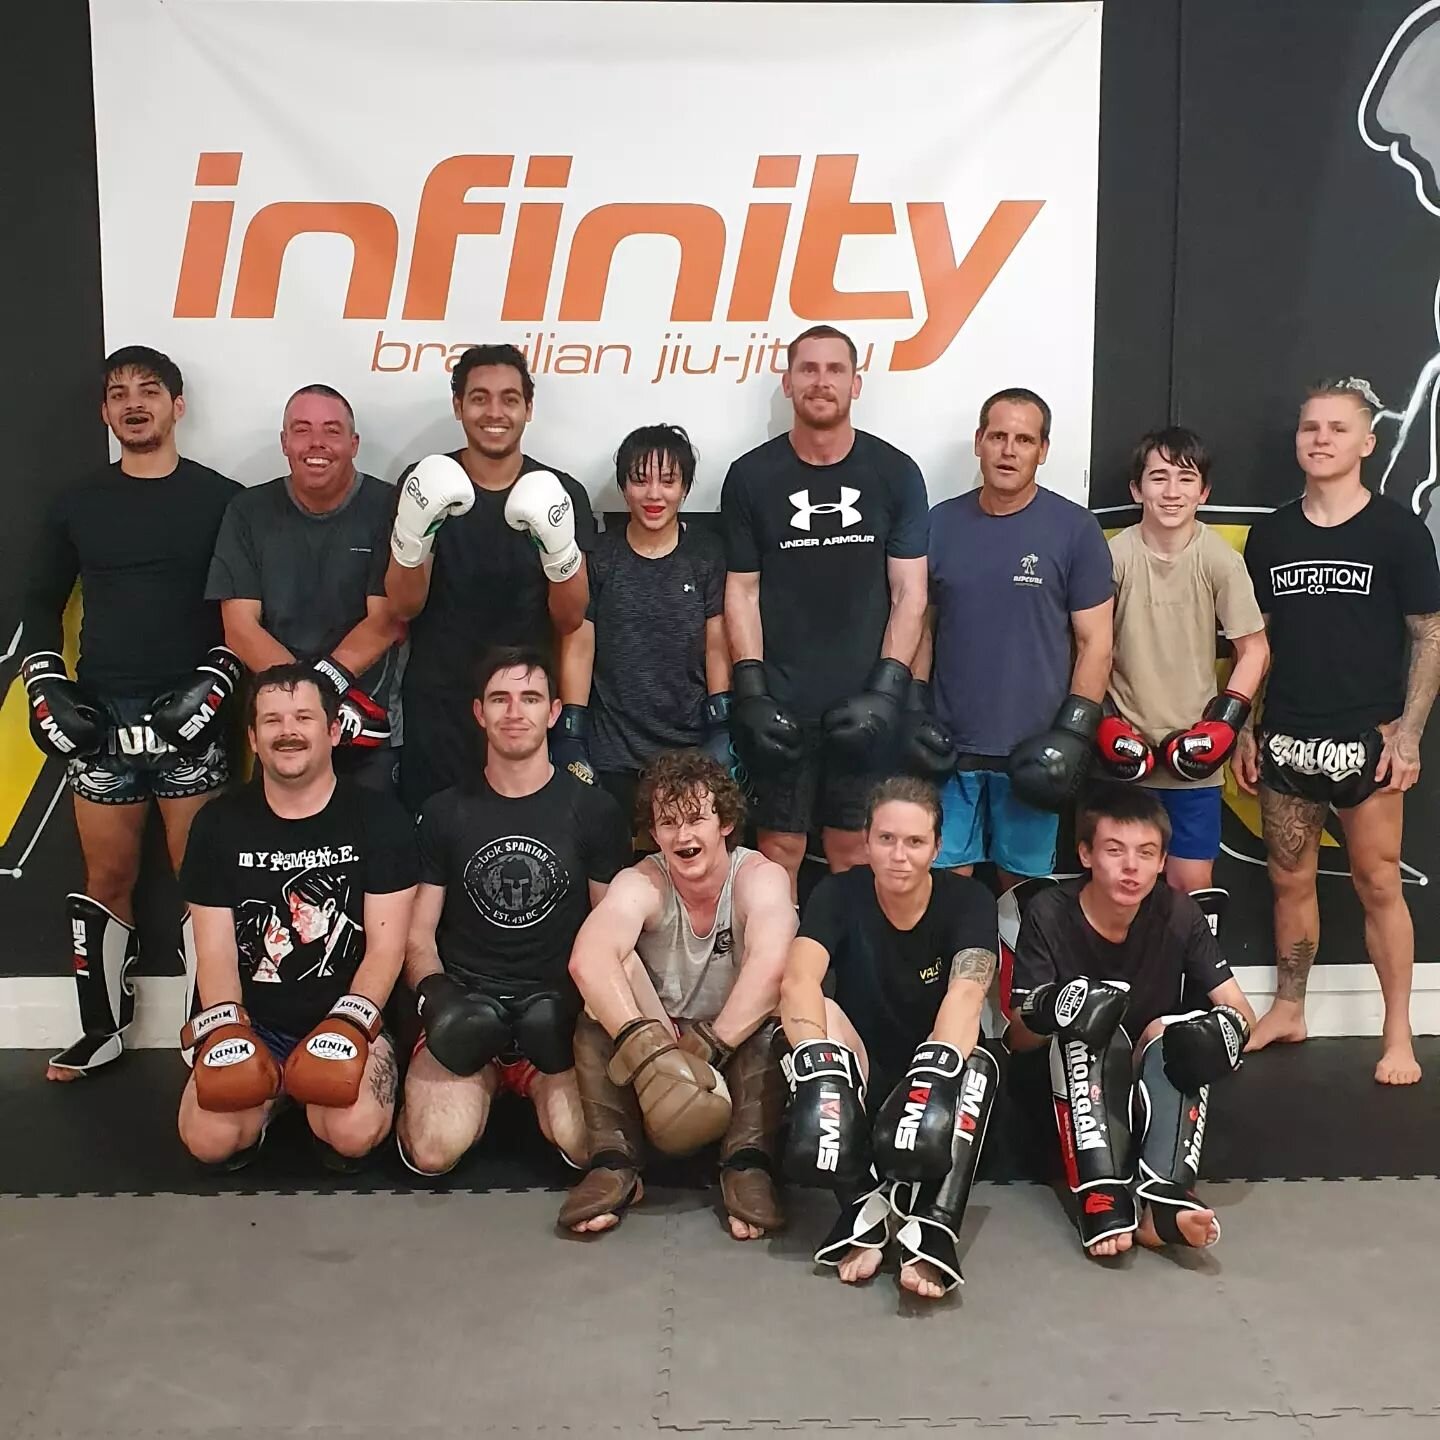 Another awesome session last night at Valor! Great effort by all! ⚔

Join us tonight for rolls and sparring from 5pm.

Martial arts is a great way to improve your life!

✅ Physical and mental toughness
✅ Confidence 
✅ Fitness and coordination 
✅ Real